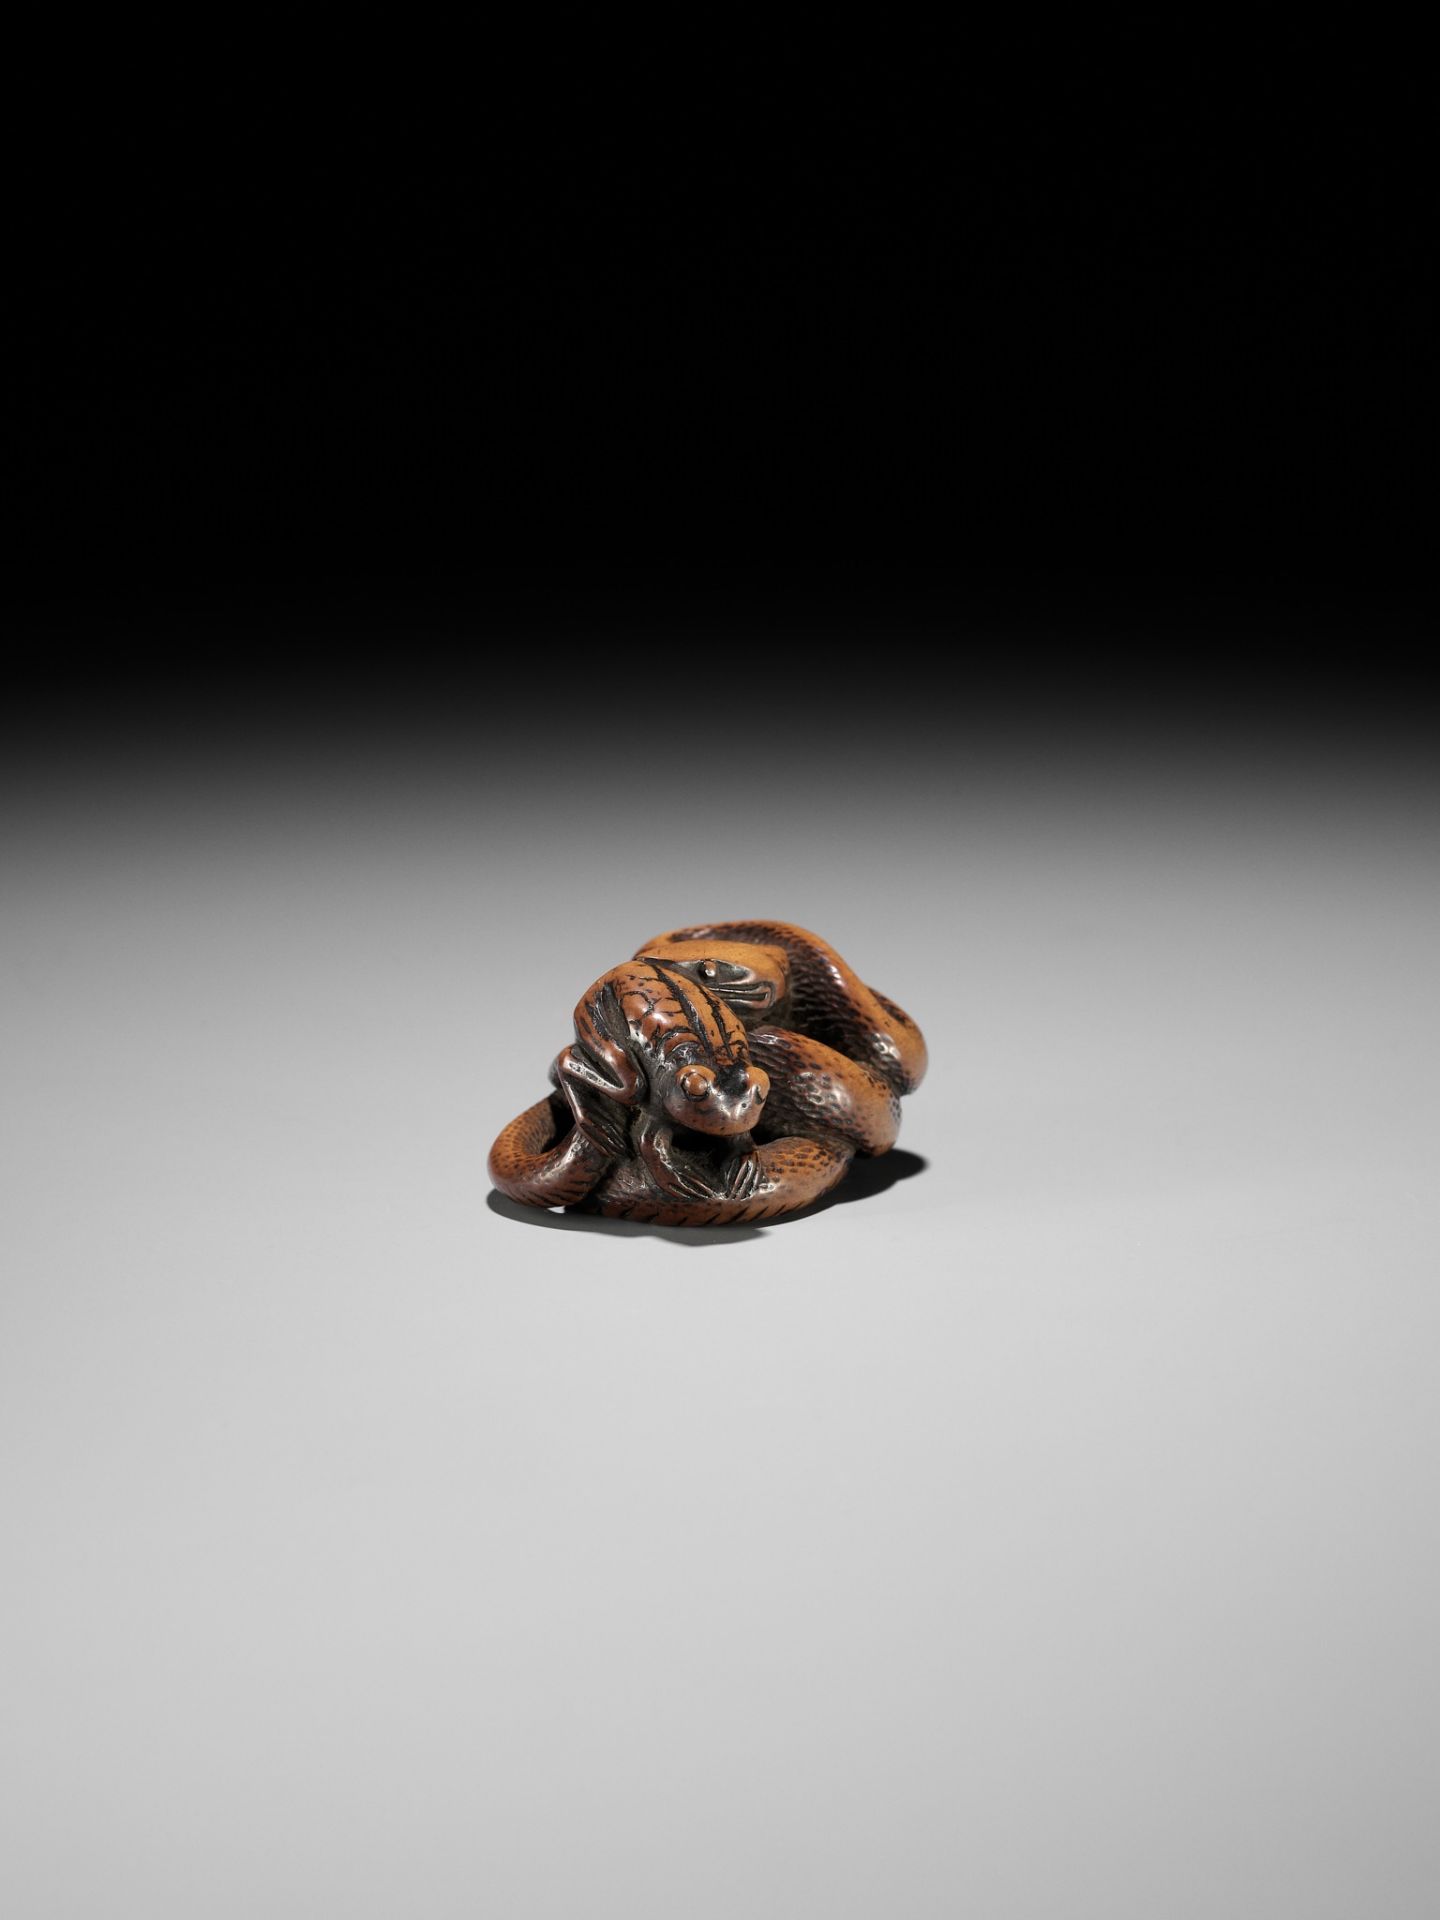 AN EARLY WOOD NETSUKE OF A SNAKE AND FROG - Image 11 of 12